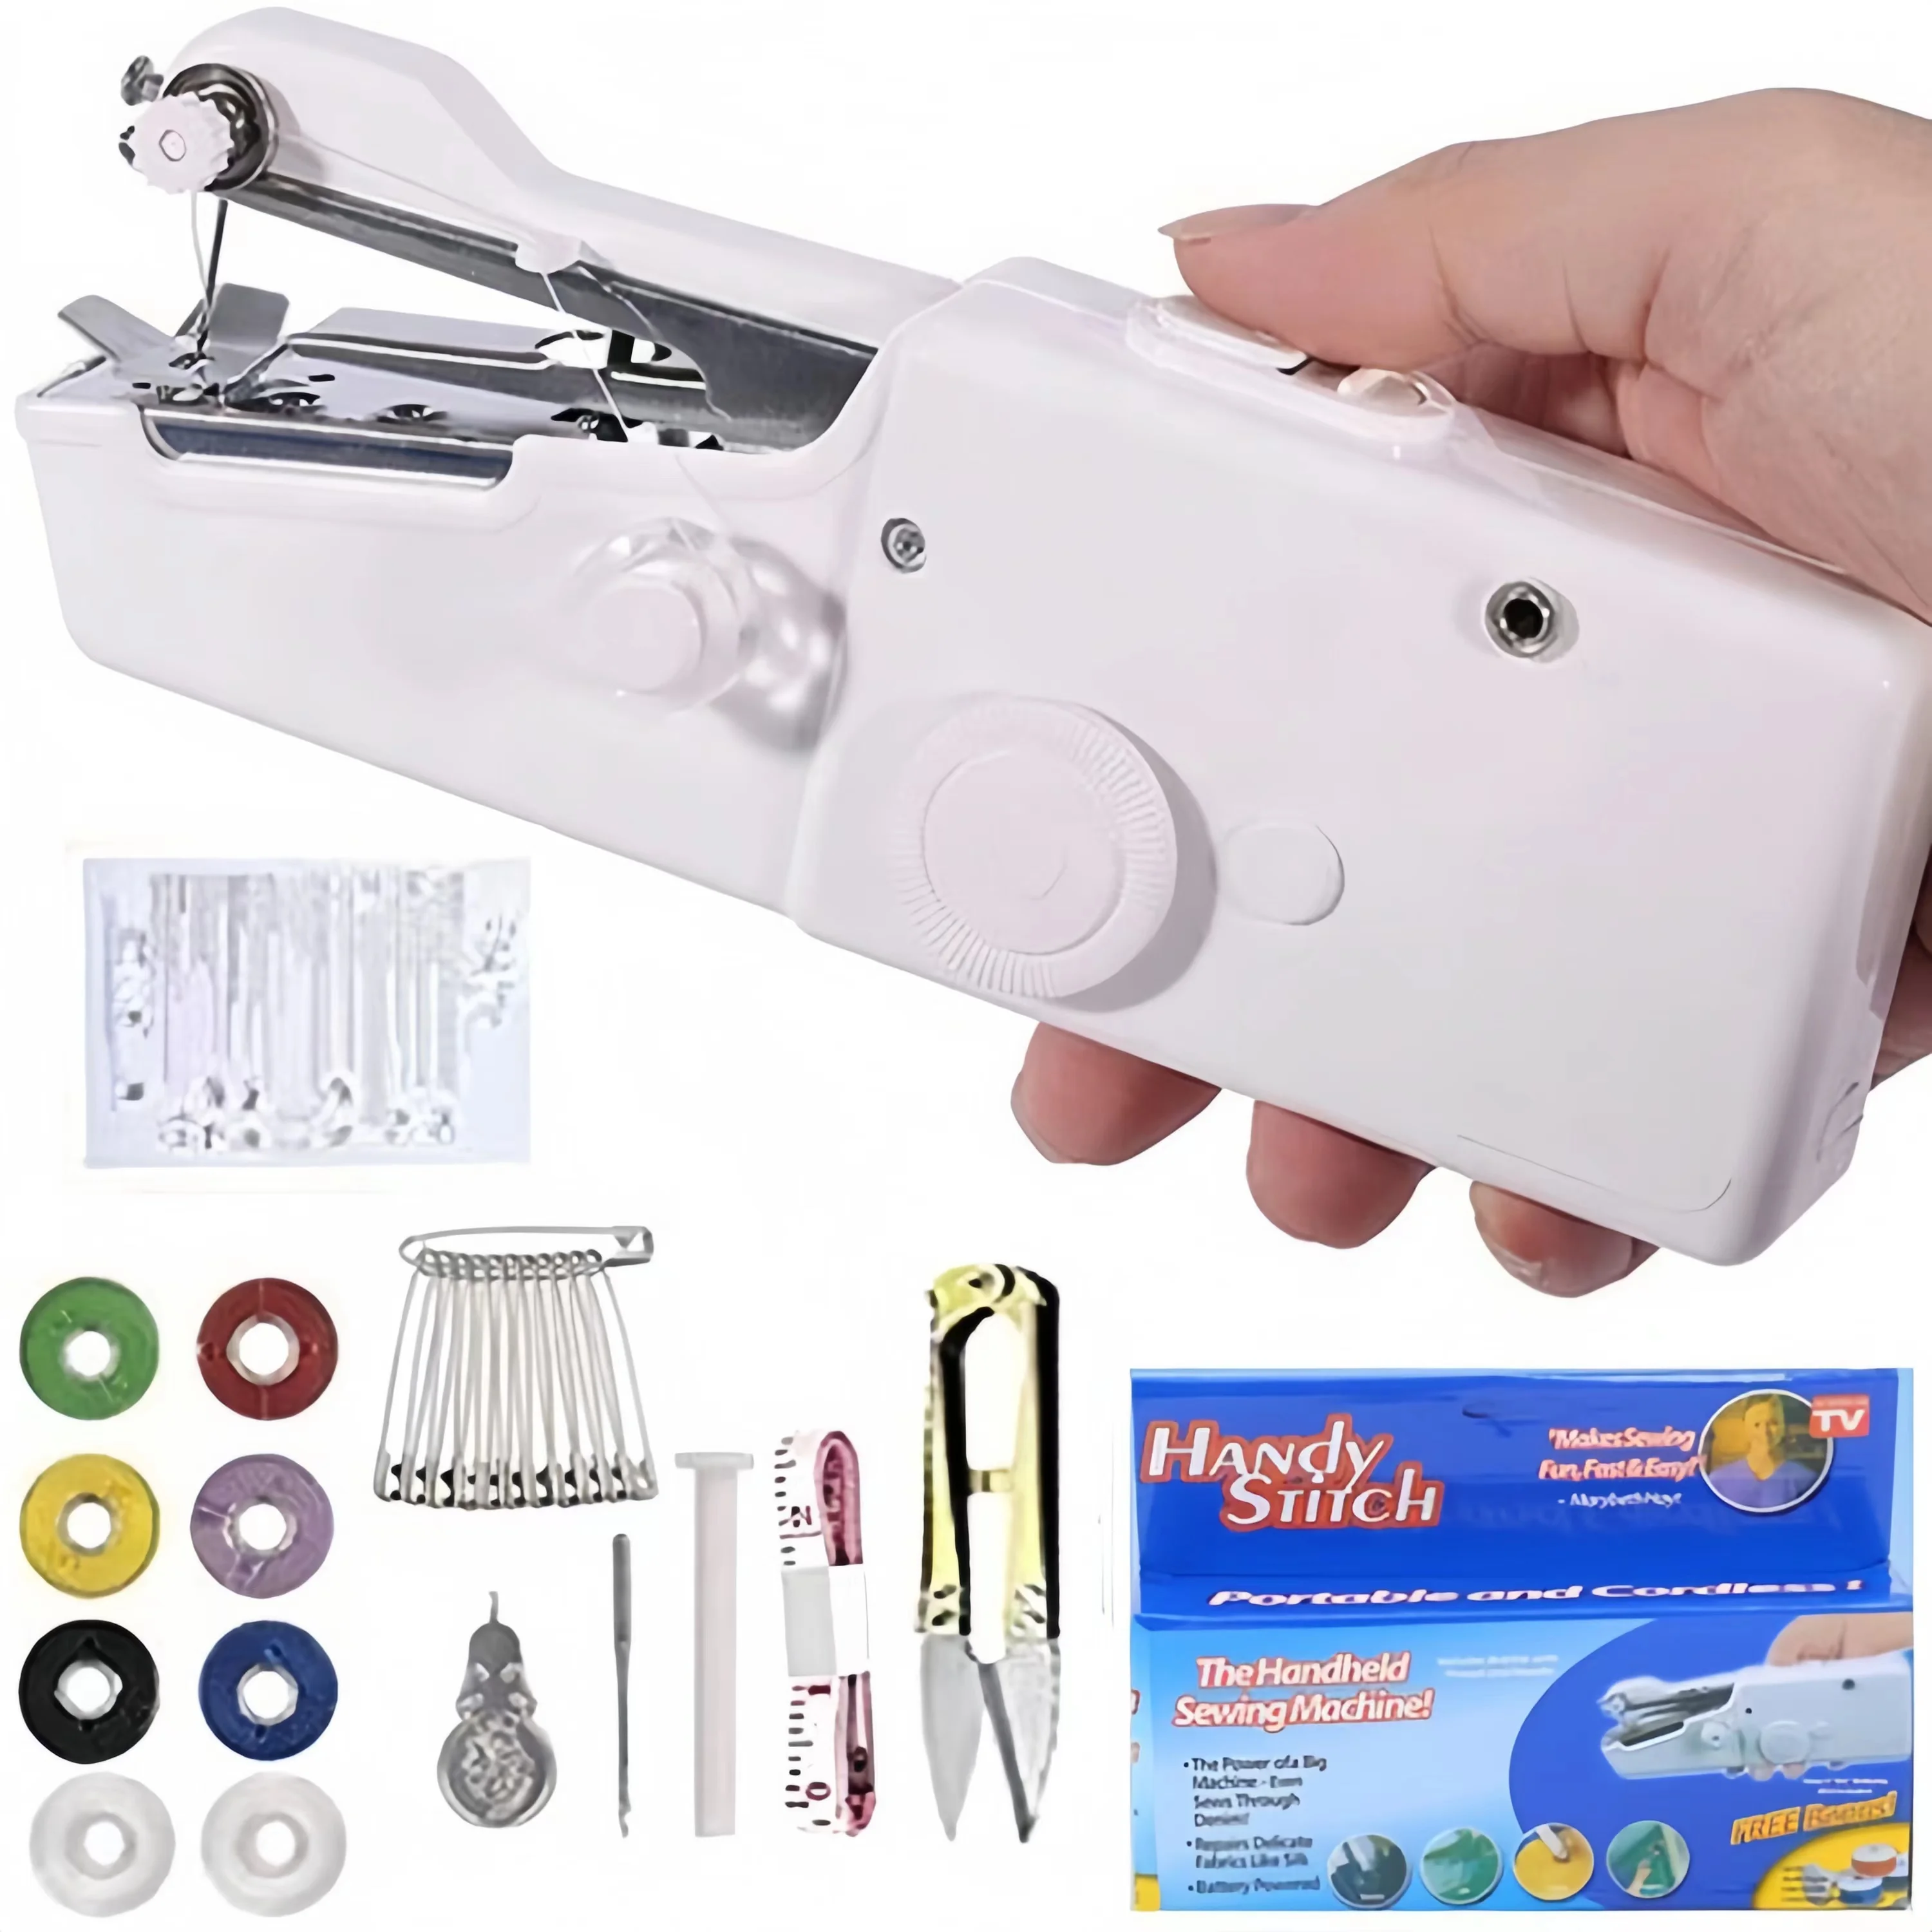 Handheld Sewing Machine Mini Handheld Sewing Machine for Quick Stitching Portable Sewing Machine Suitable for HomeTravel and DIY